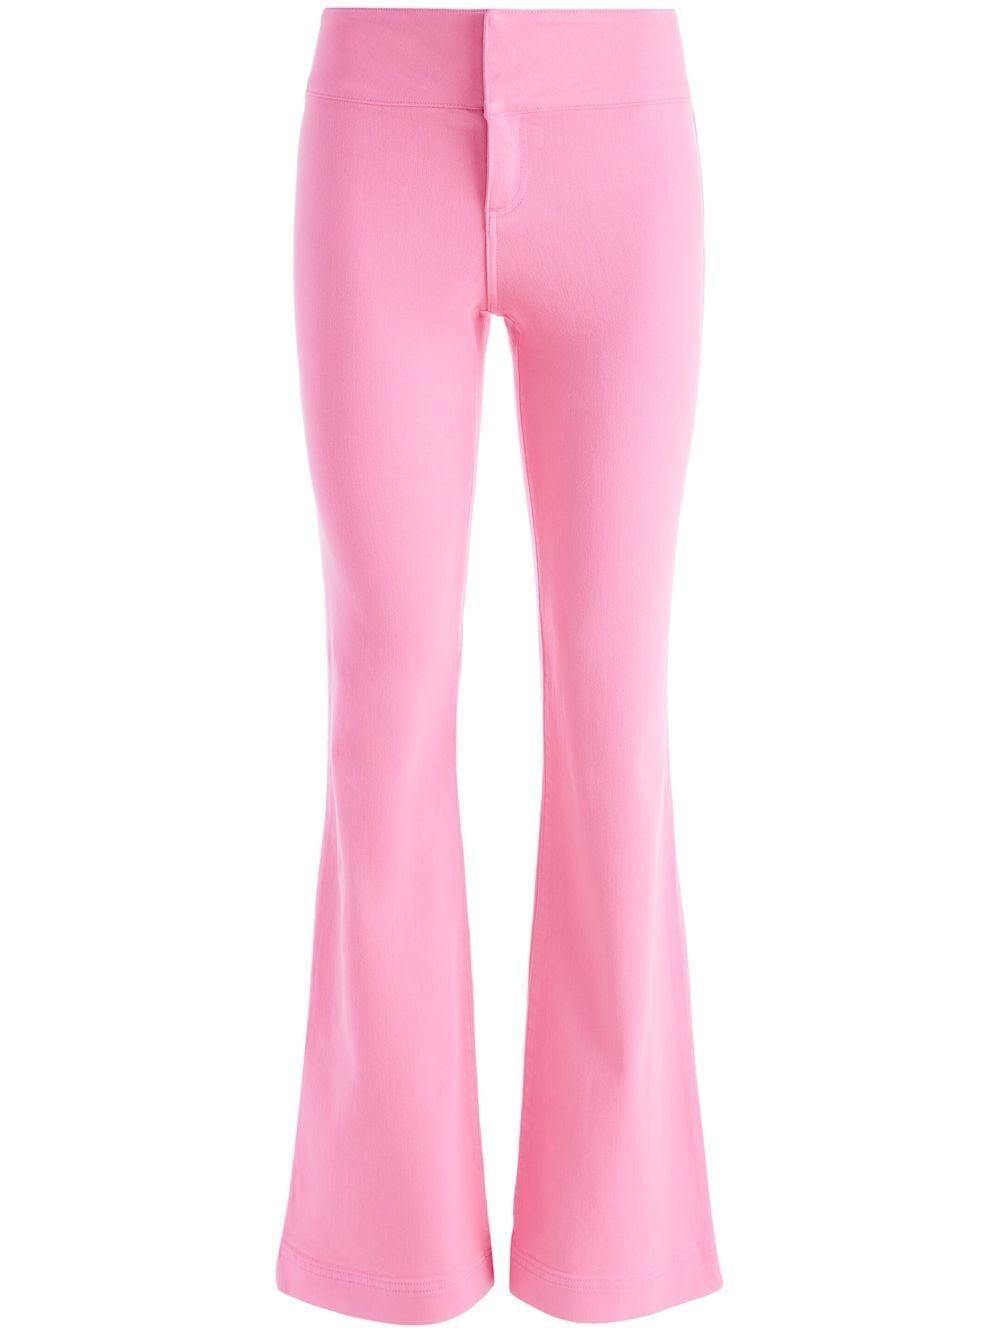 Alice + Olivia Olivia Bootcut Jeans in Pink | Lyst